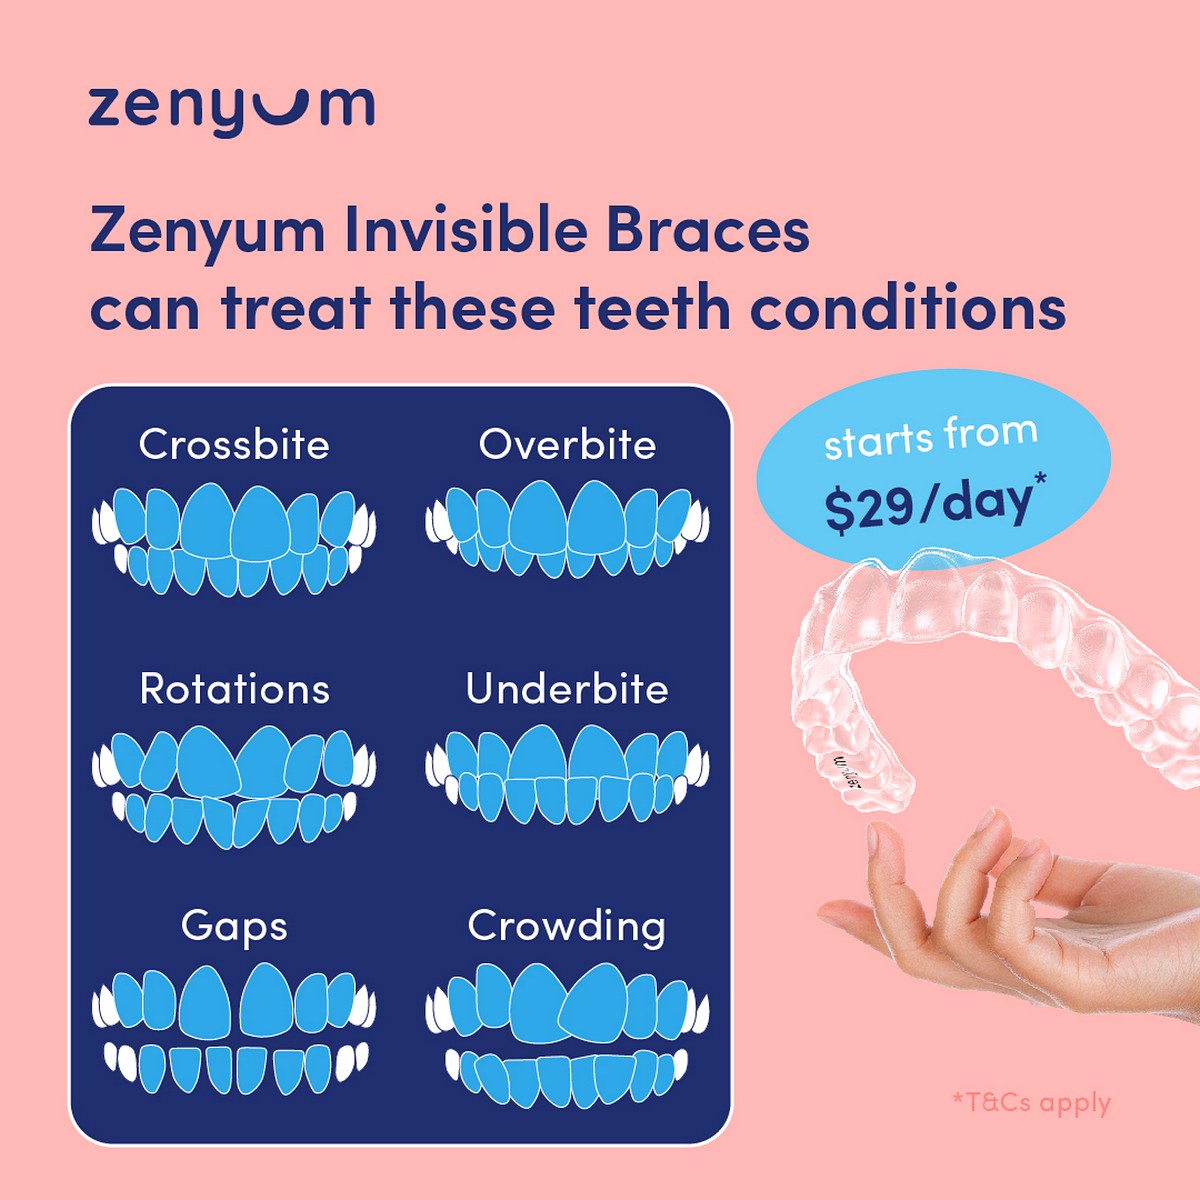 Treat-teeth-conditions_SGEN_IGP_Treat-teeth-conditions Now till 31 Aug 2022: Free Smile Assessment with Extra Discounts on Zenyum Invisible Braces